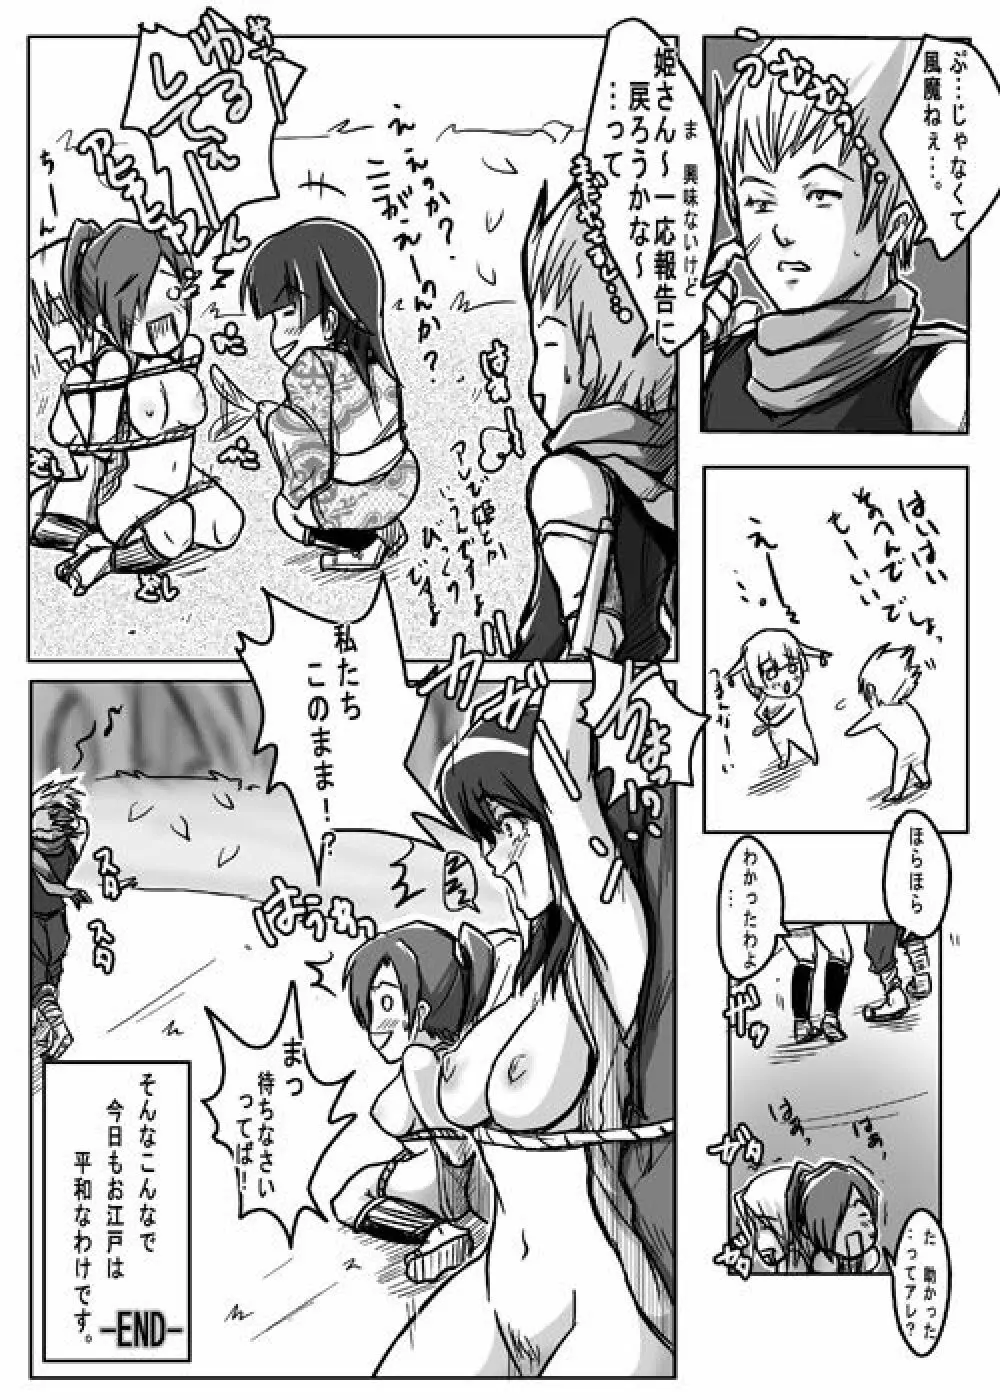 Same-themed manga about kid fighting female ninjas from japanese imageboard. Page.58